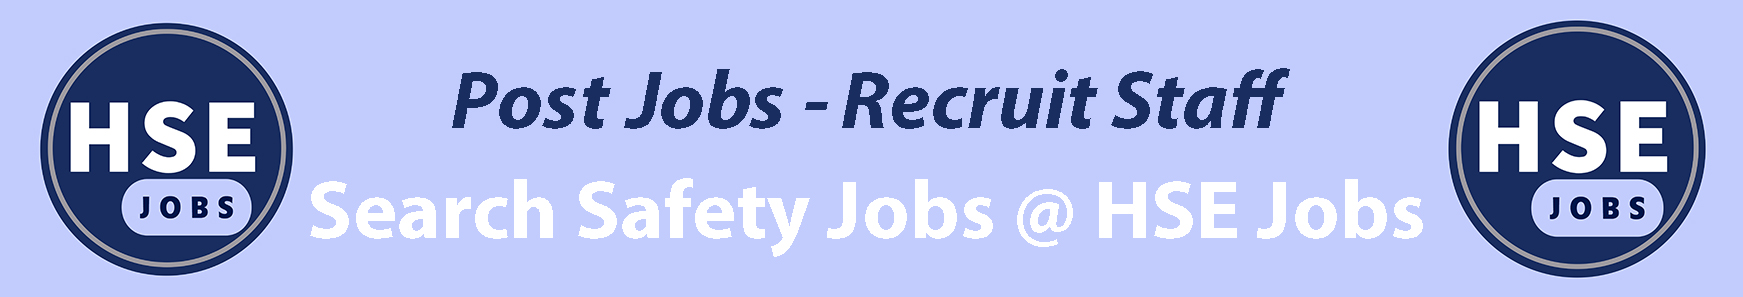 HSE Jobs, Health and Safety, Environmental Jobs